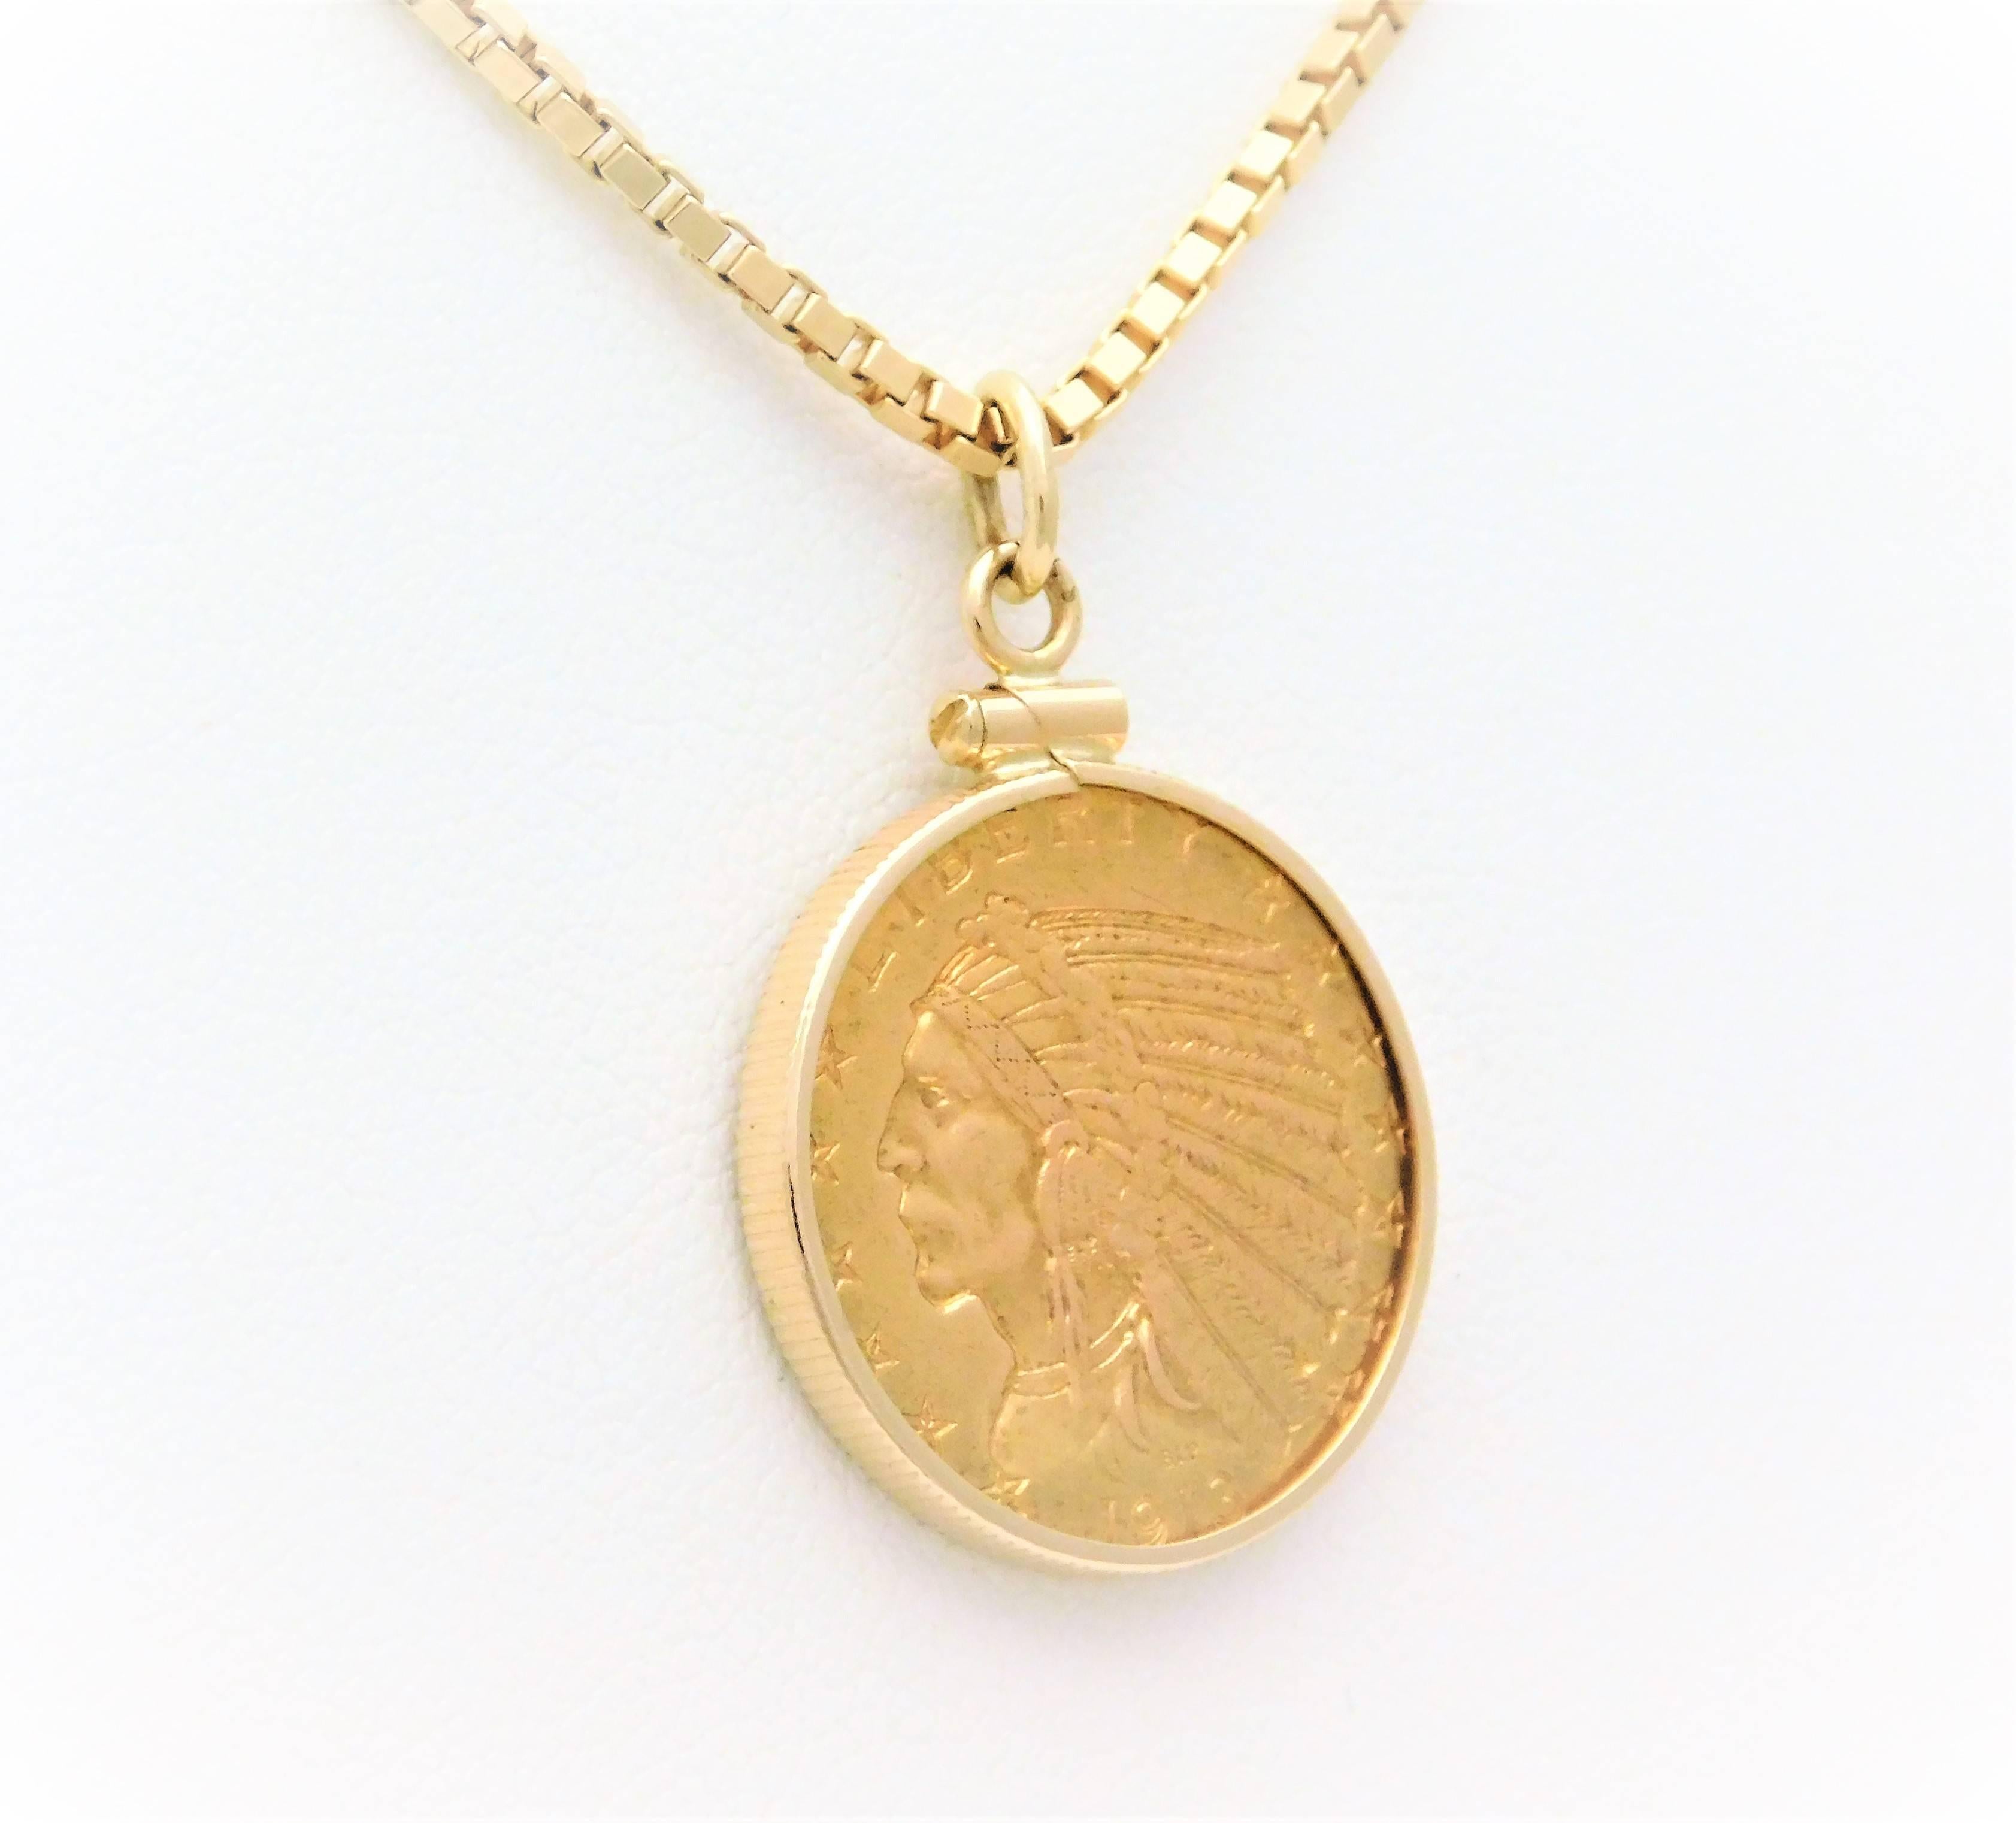 Edwardian US 1913 $5 Indian Head Coin Pendant Necklace